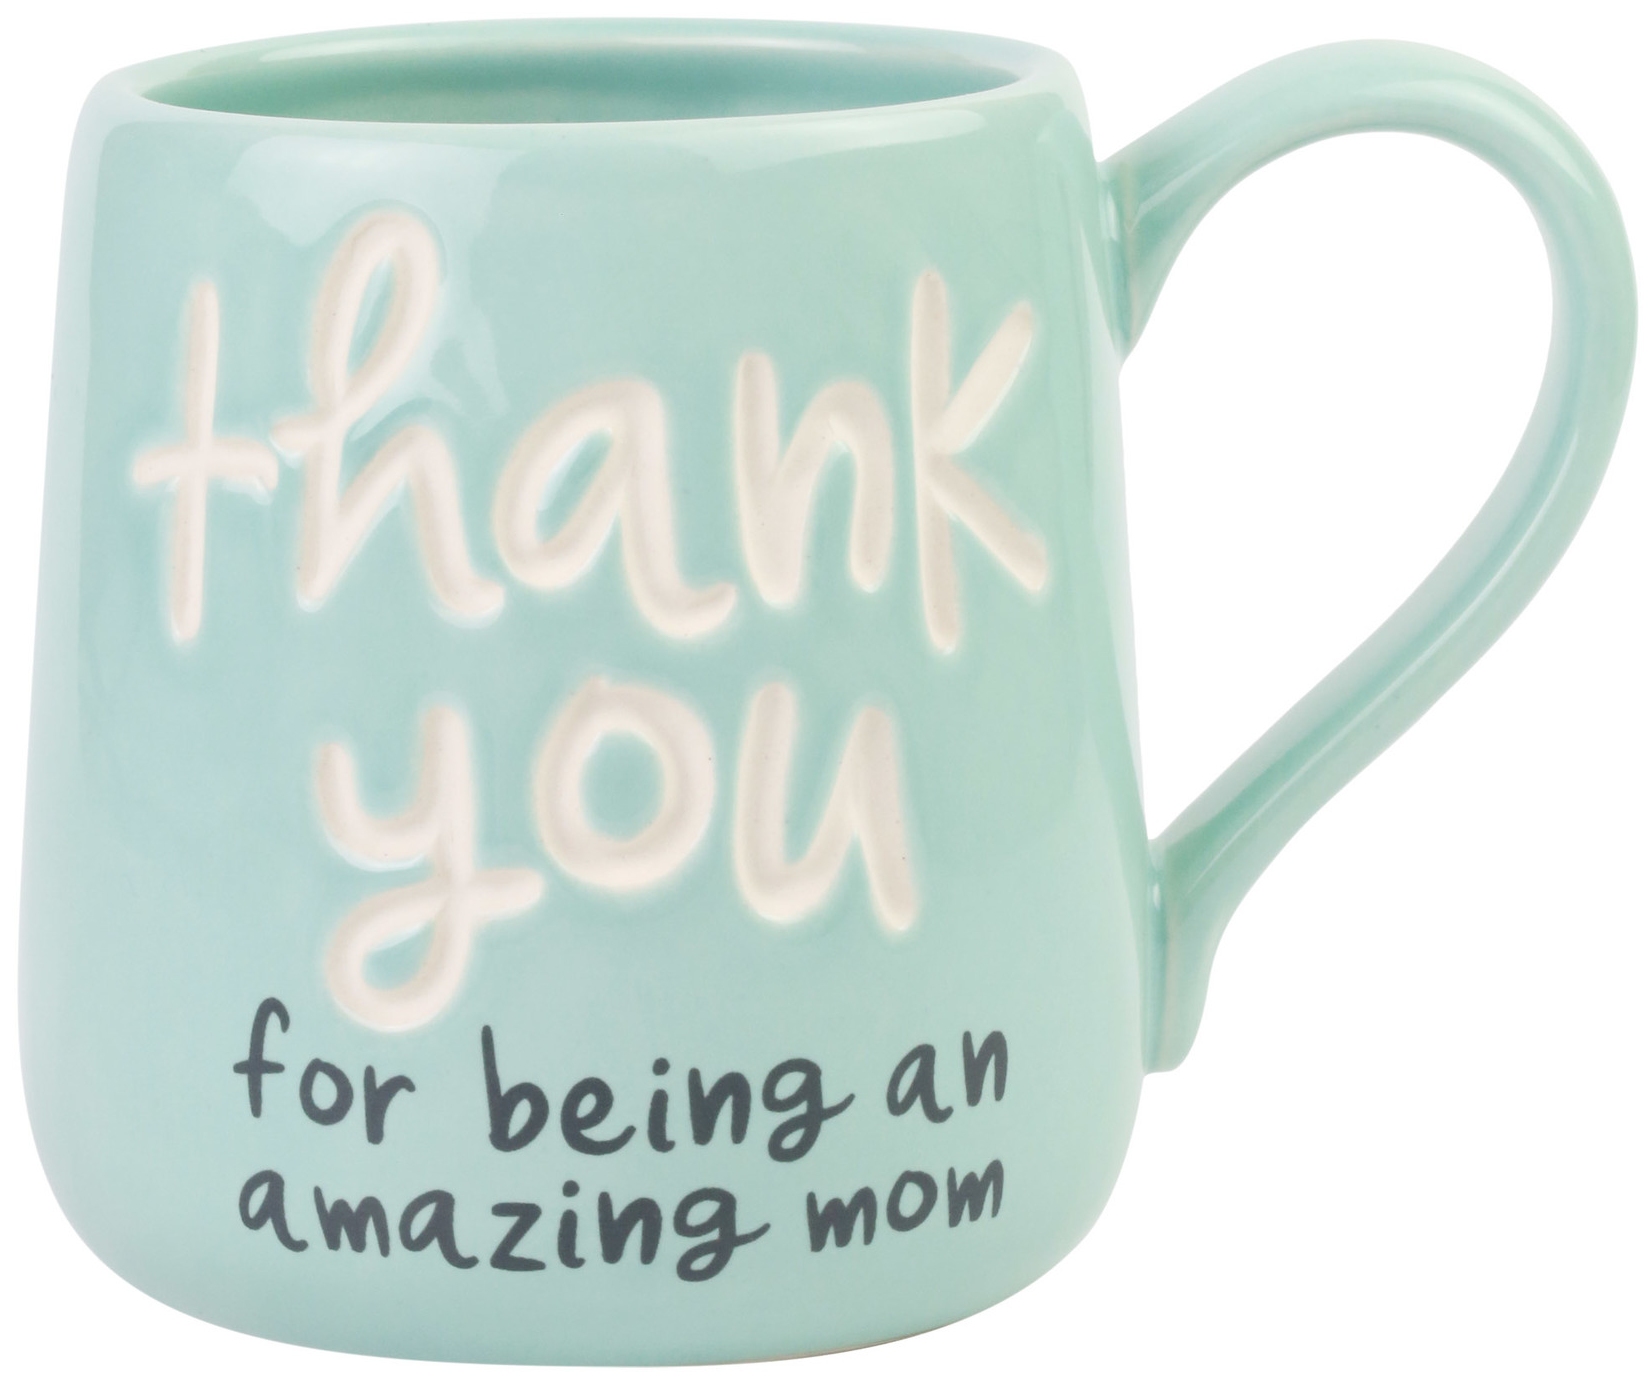 Our Name Is Mud 6008024 Thank You For Being An Amazing Mom Mug Set of 2